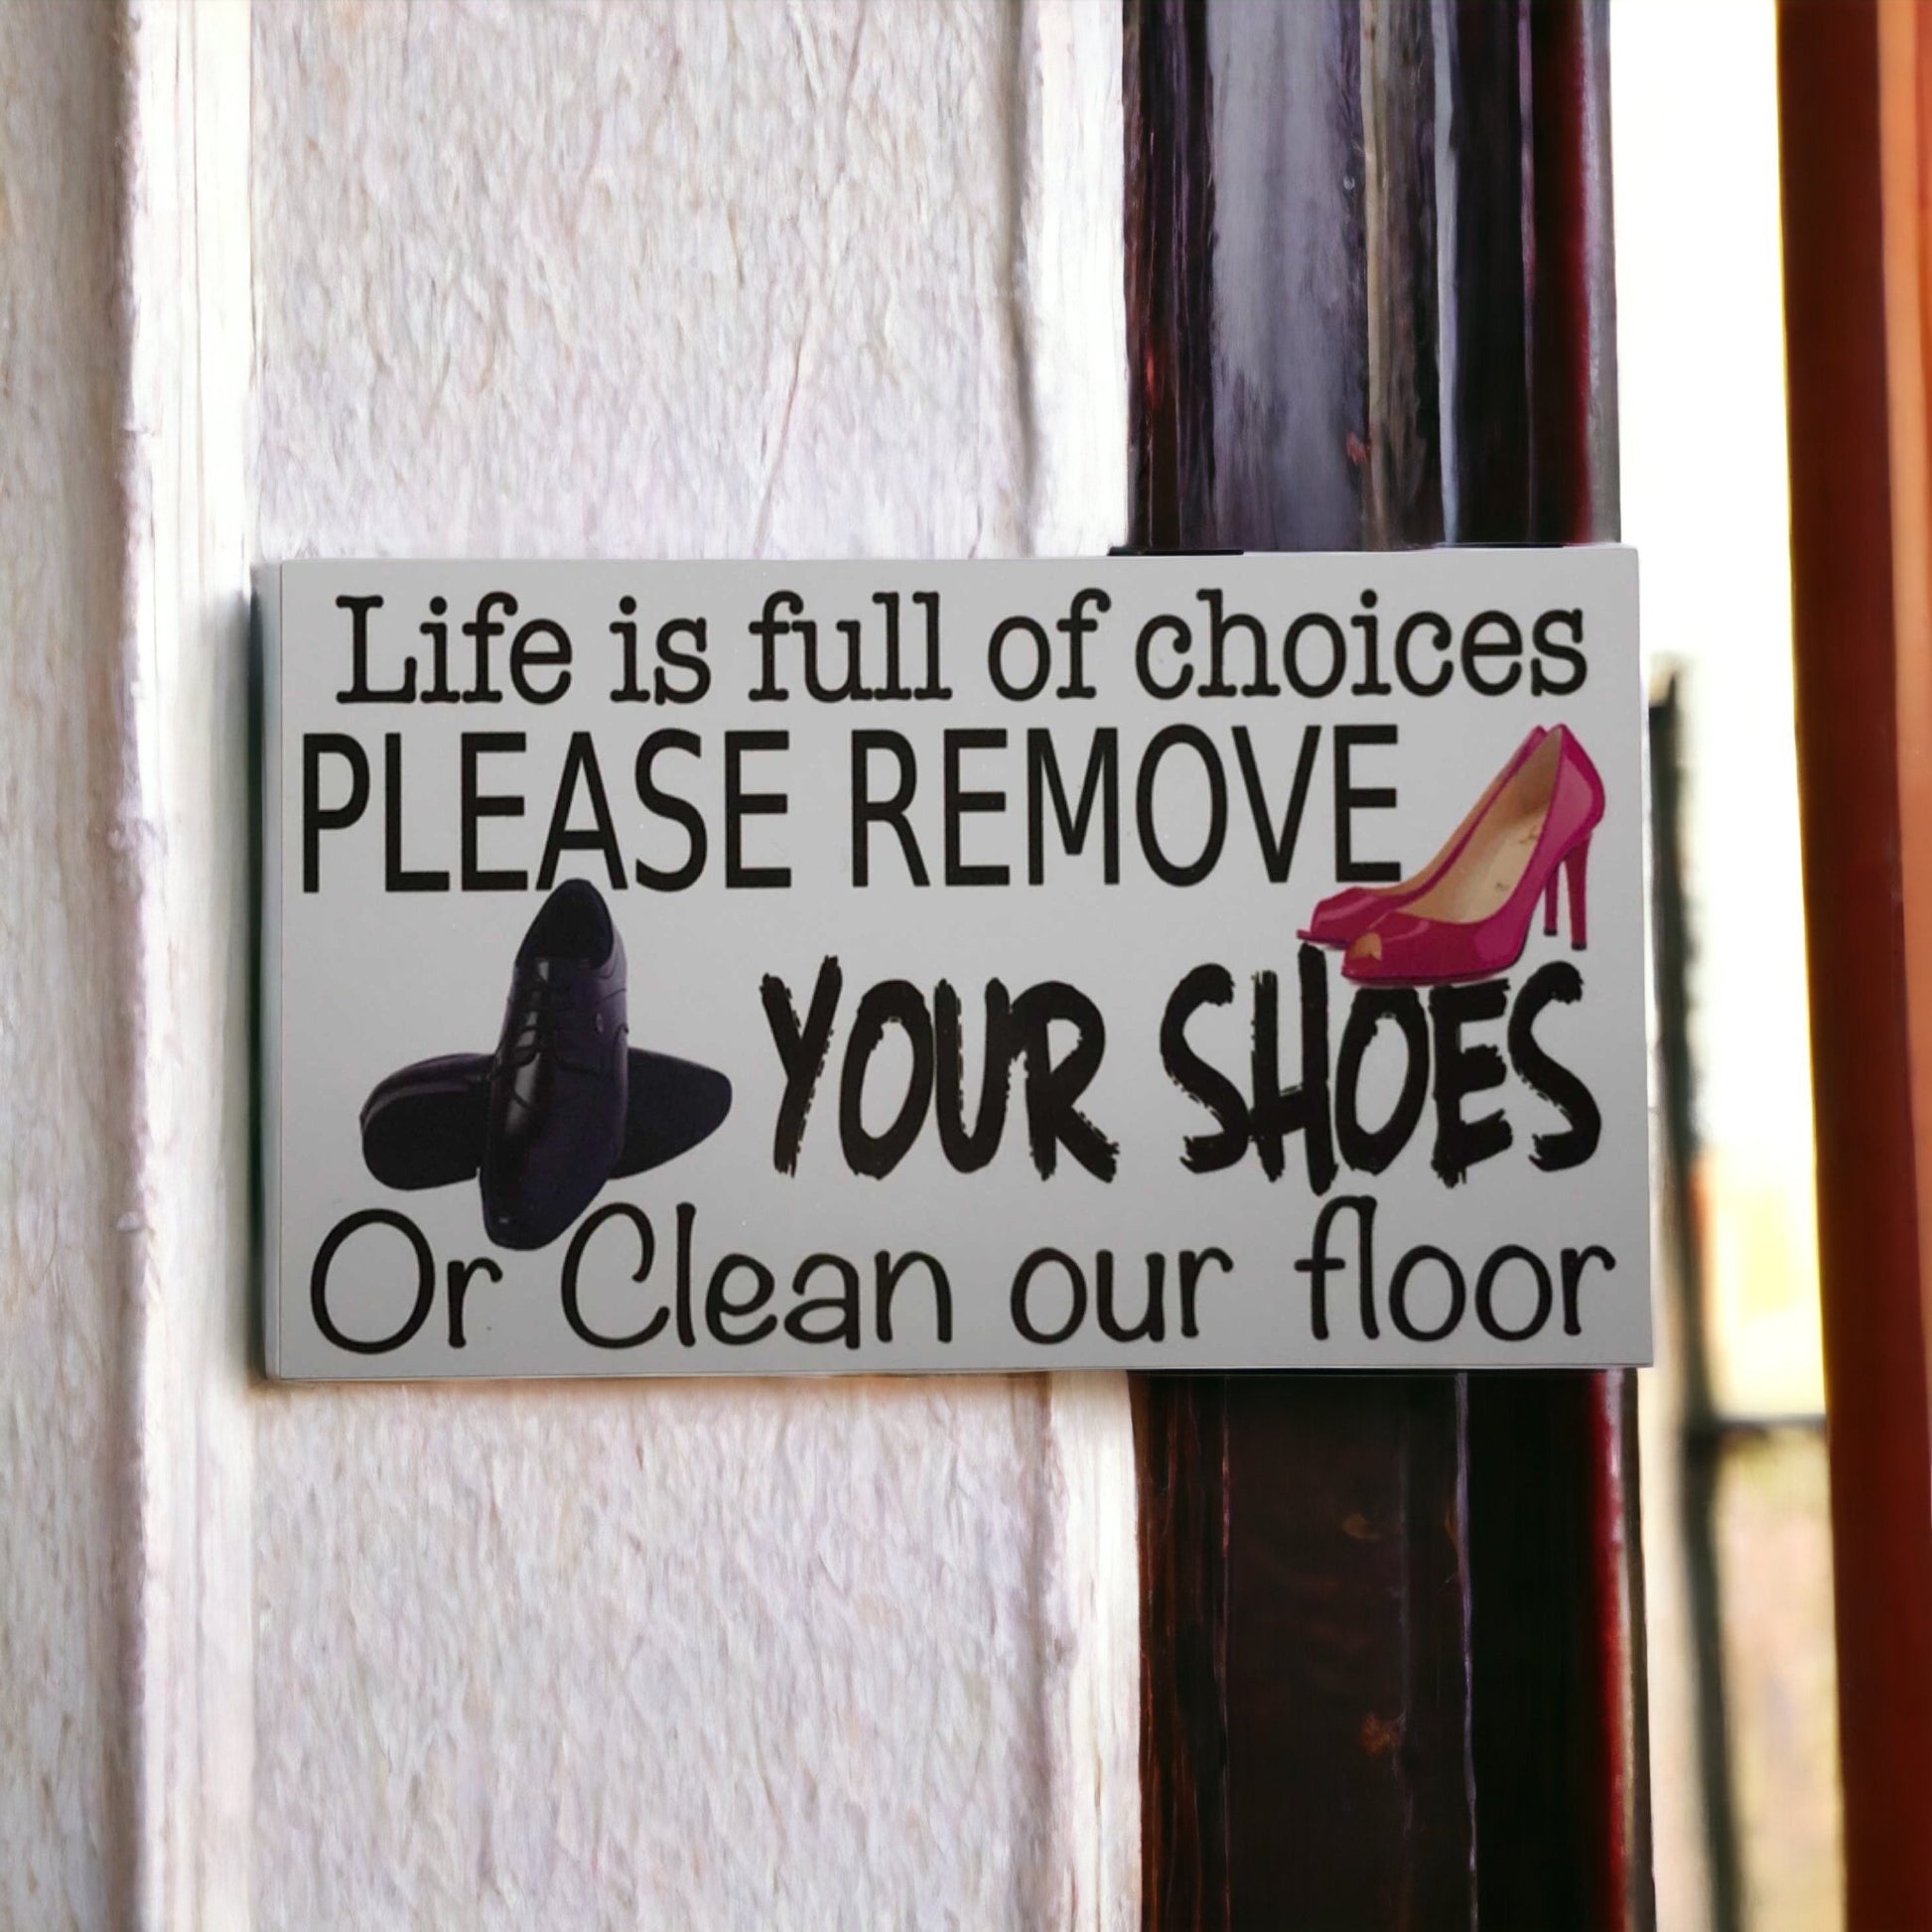 Life Choices Remove Your Shoes Or Clean Floor Sign - The Renmy Store Homewares & Gifts 